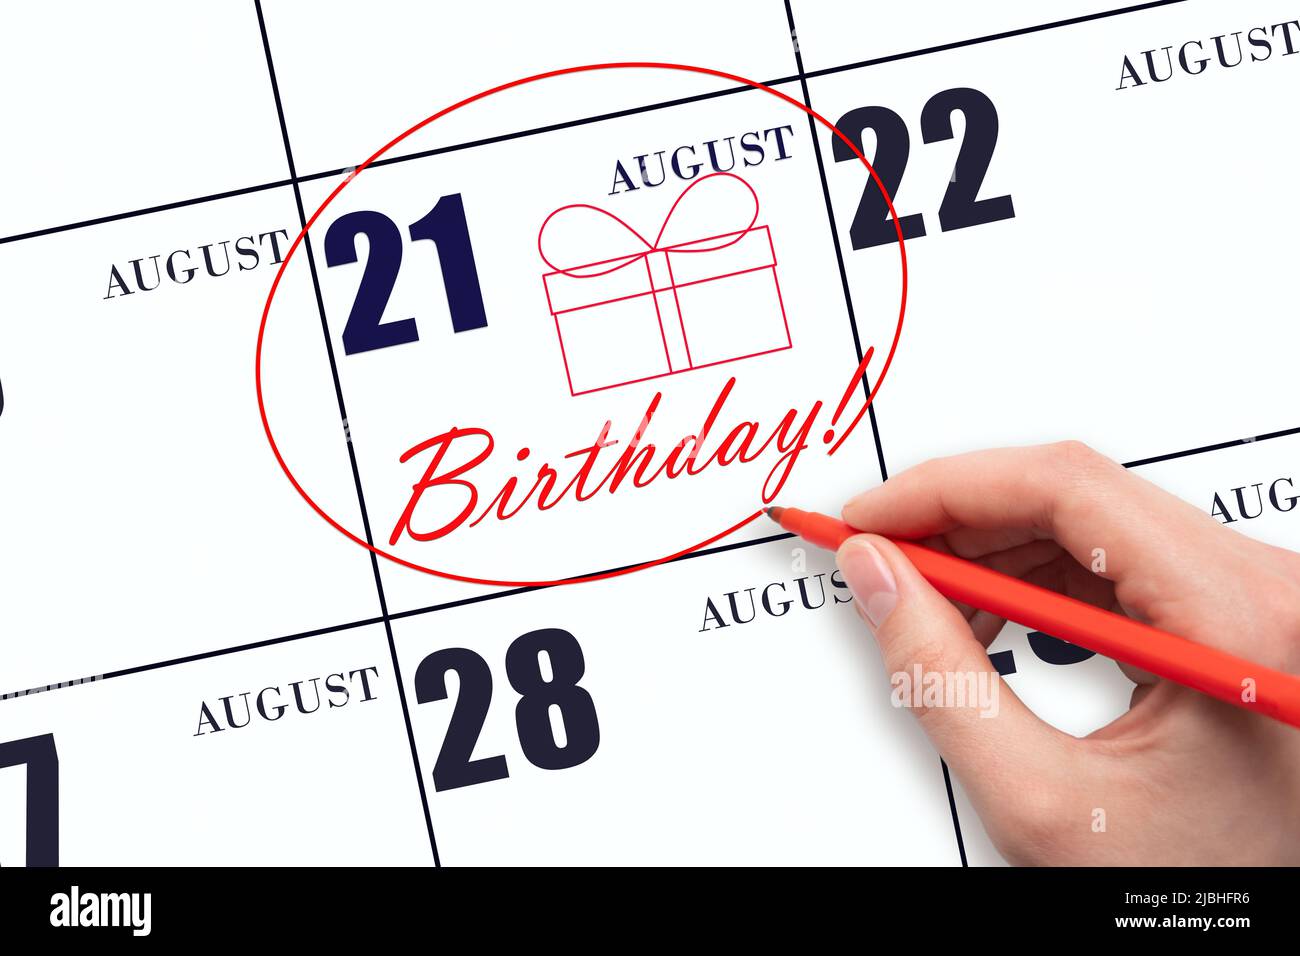 21st day of August. The hand circles the date on the calendar 21 August, draws a gift box and writes the text Birthday. Holiday. Summer month, day of Stock Photo